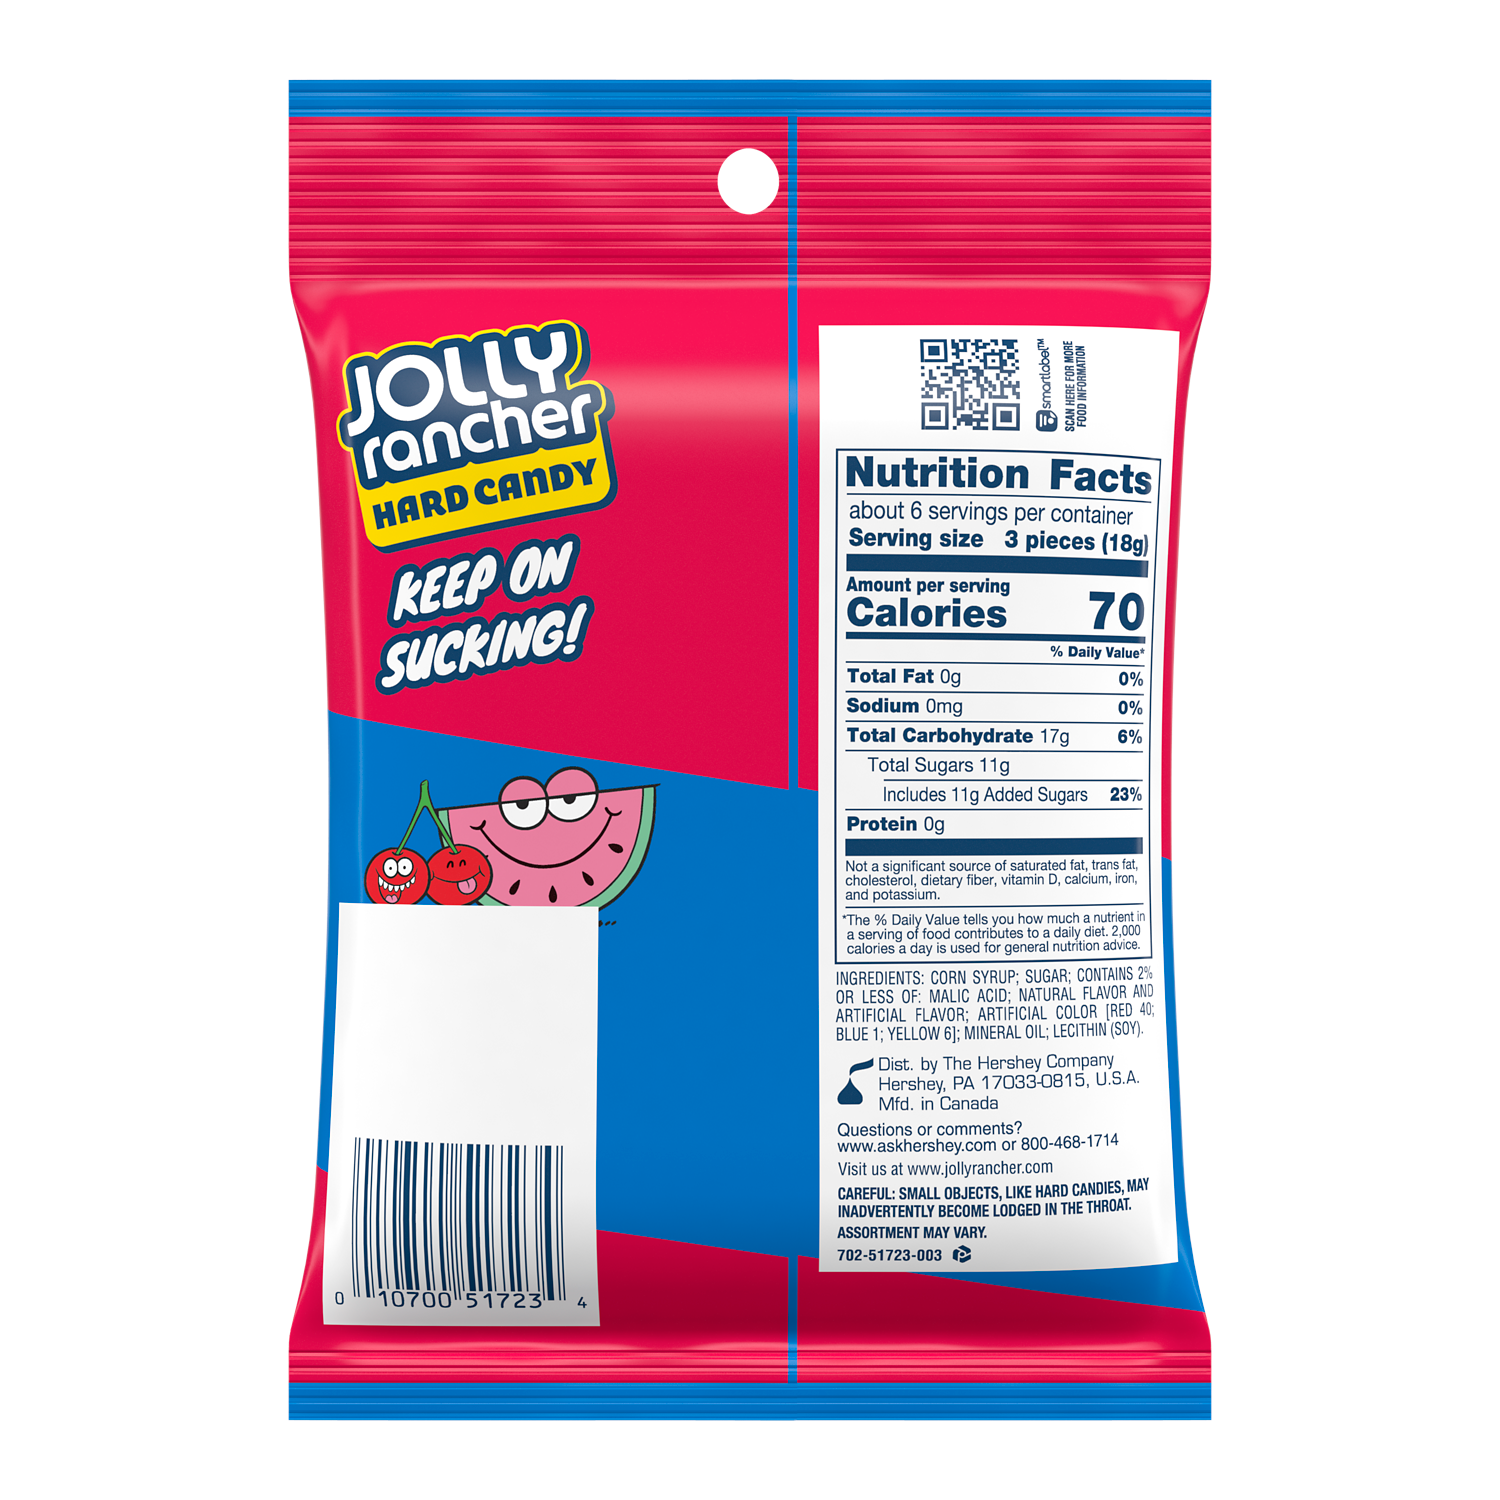 JOLLY RANCHER Awesome Reds Hard Candy, 3.8 oz bag - Back of Package